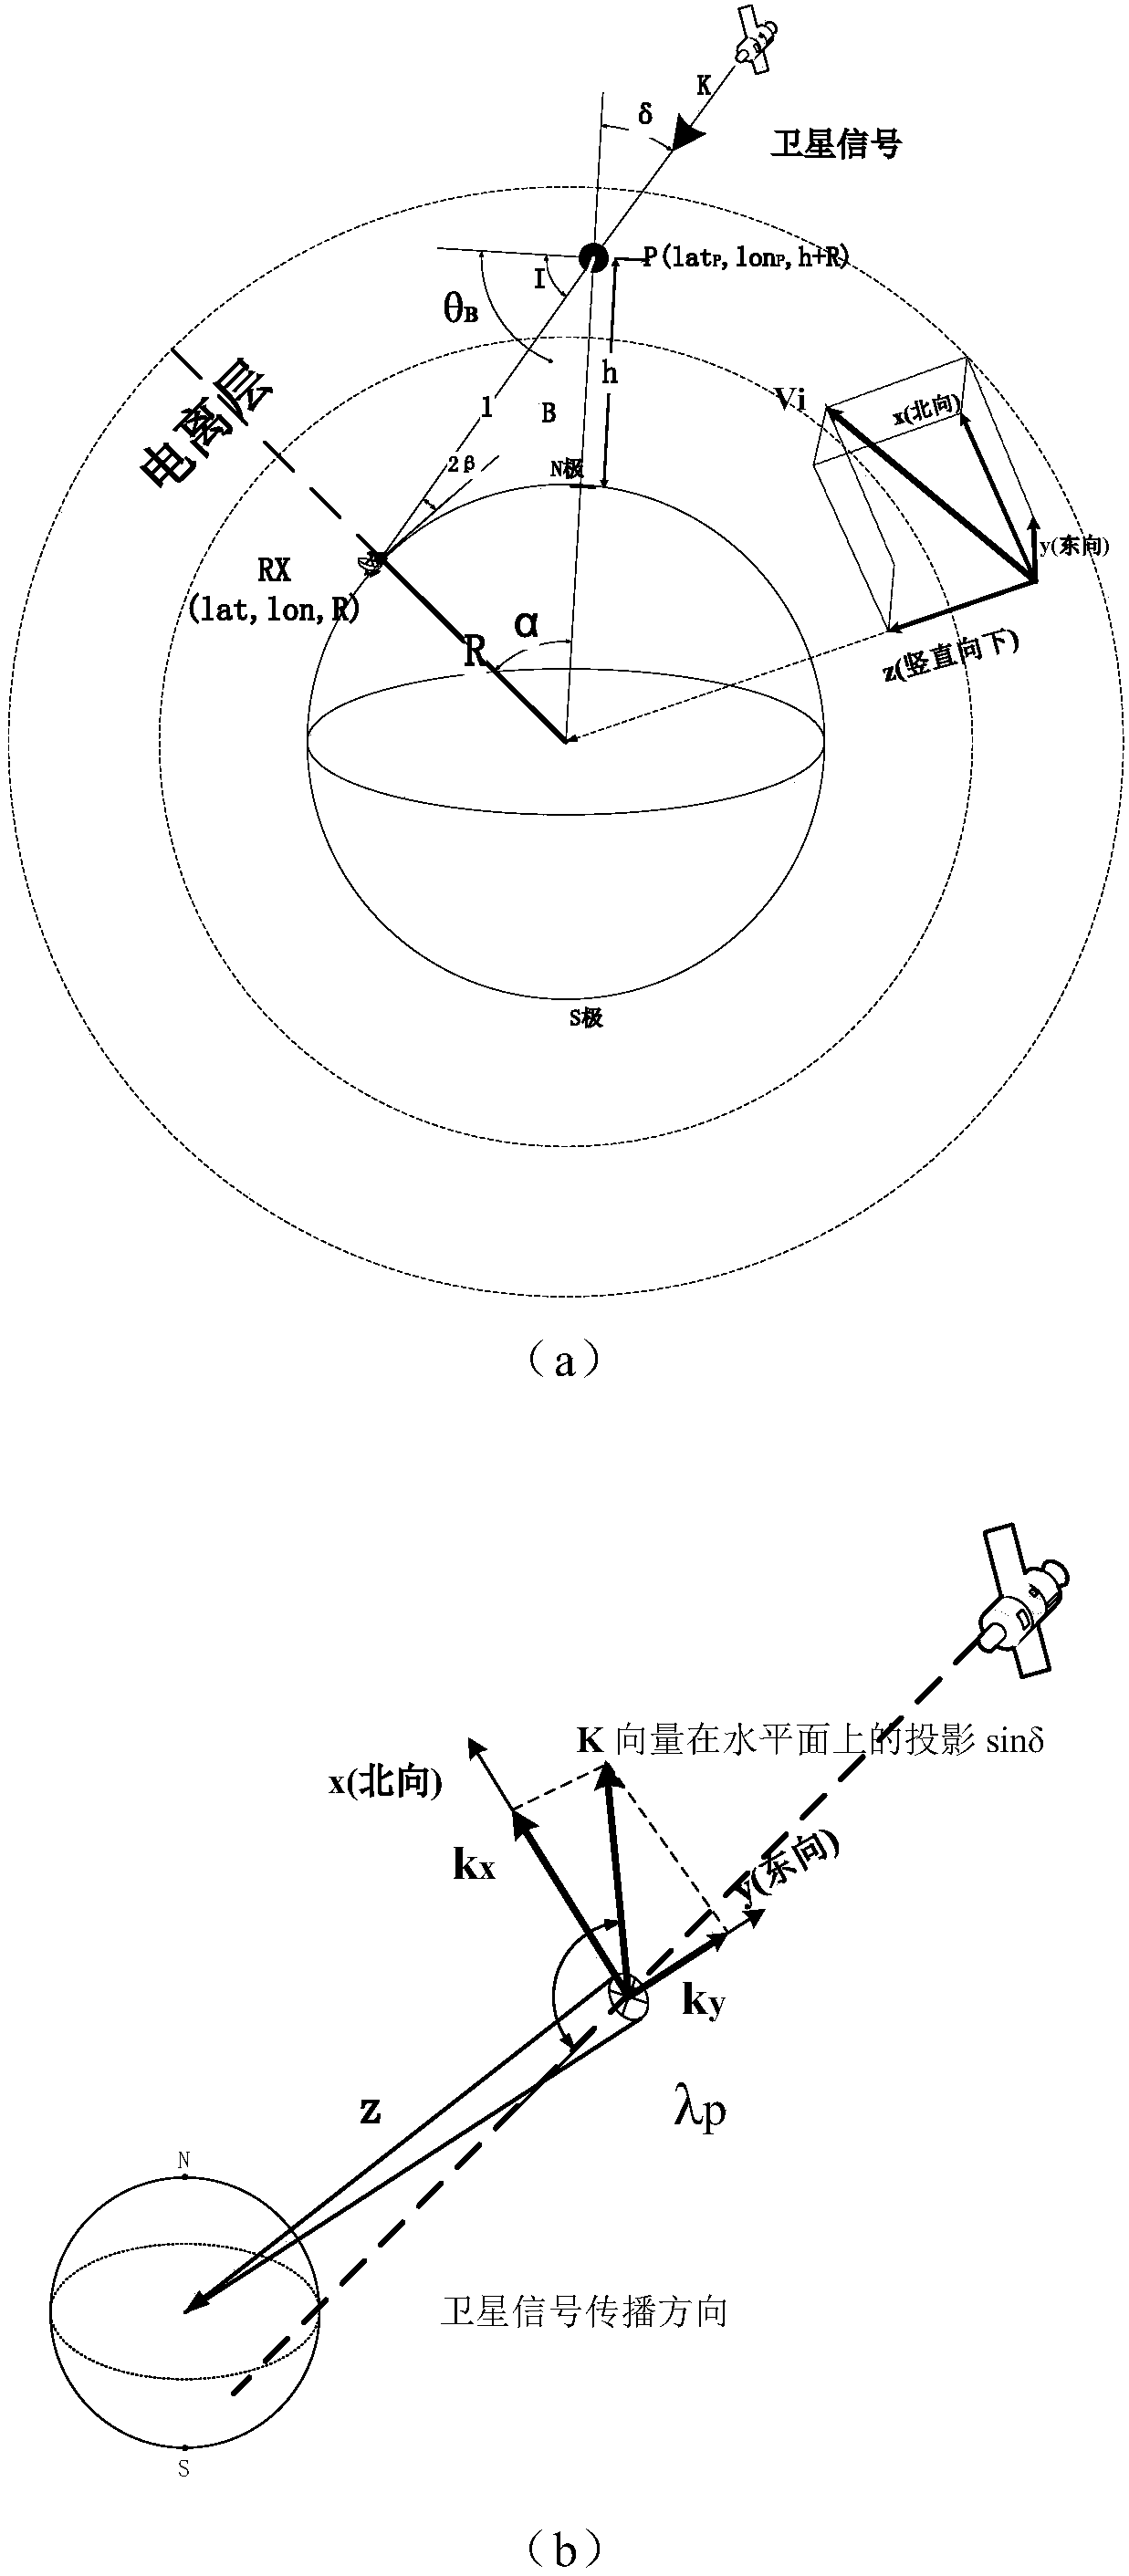 Method for calculating the drift velocity of an ionospheric irregularity based on the phase screen theory